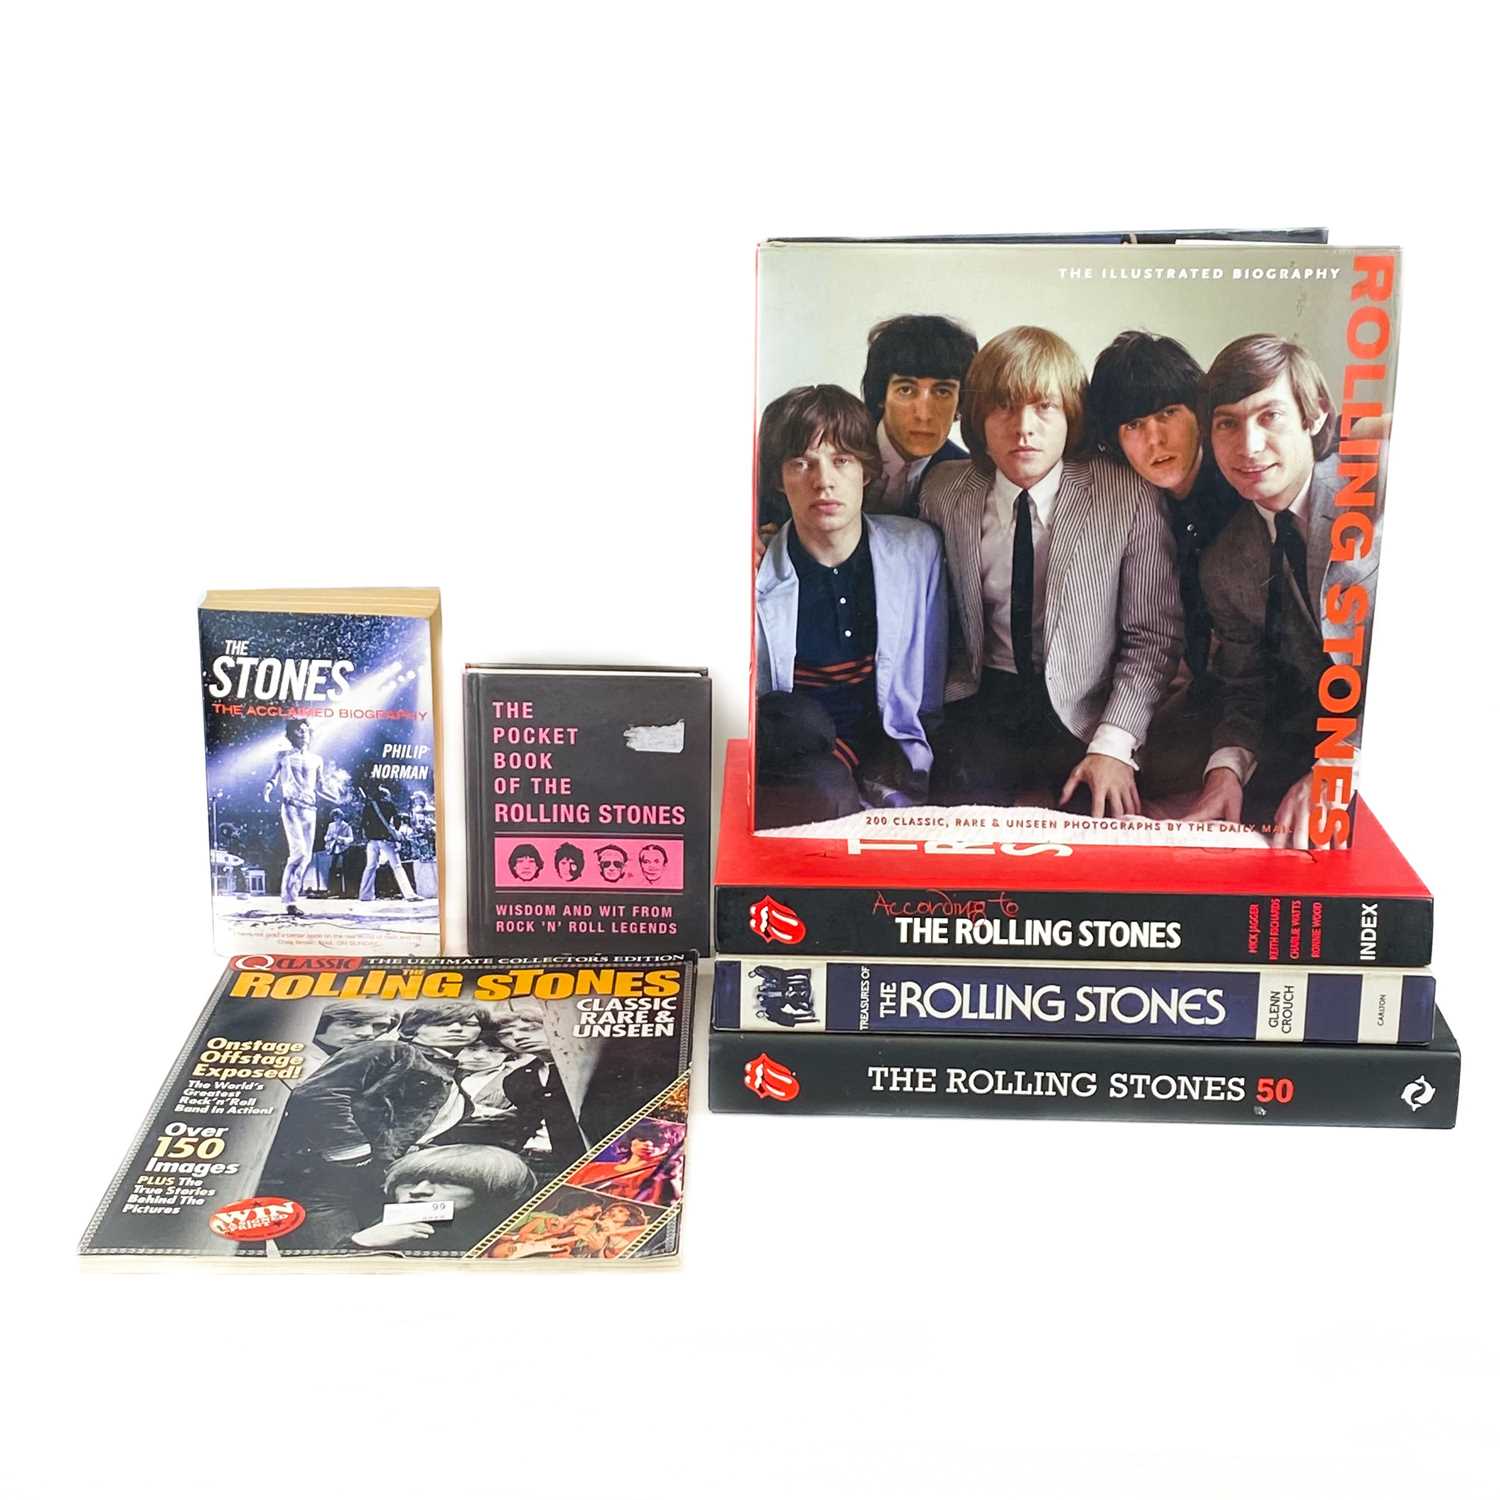 The Rolling Stones. Six books.